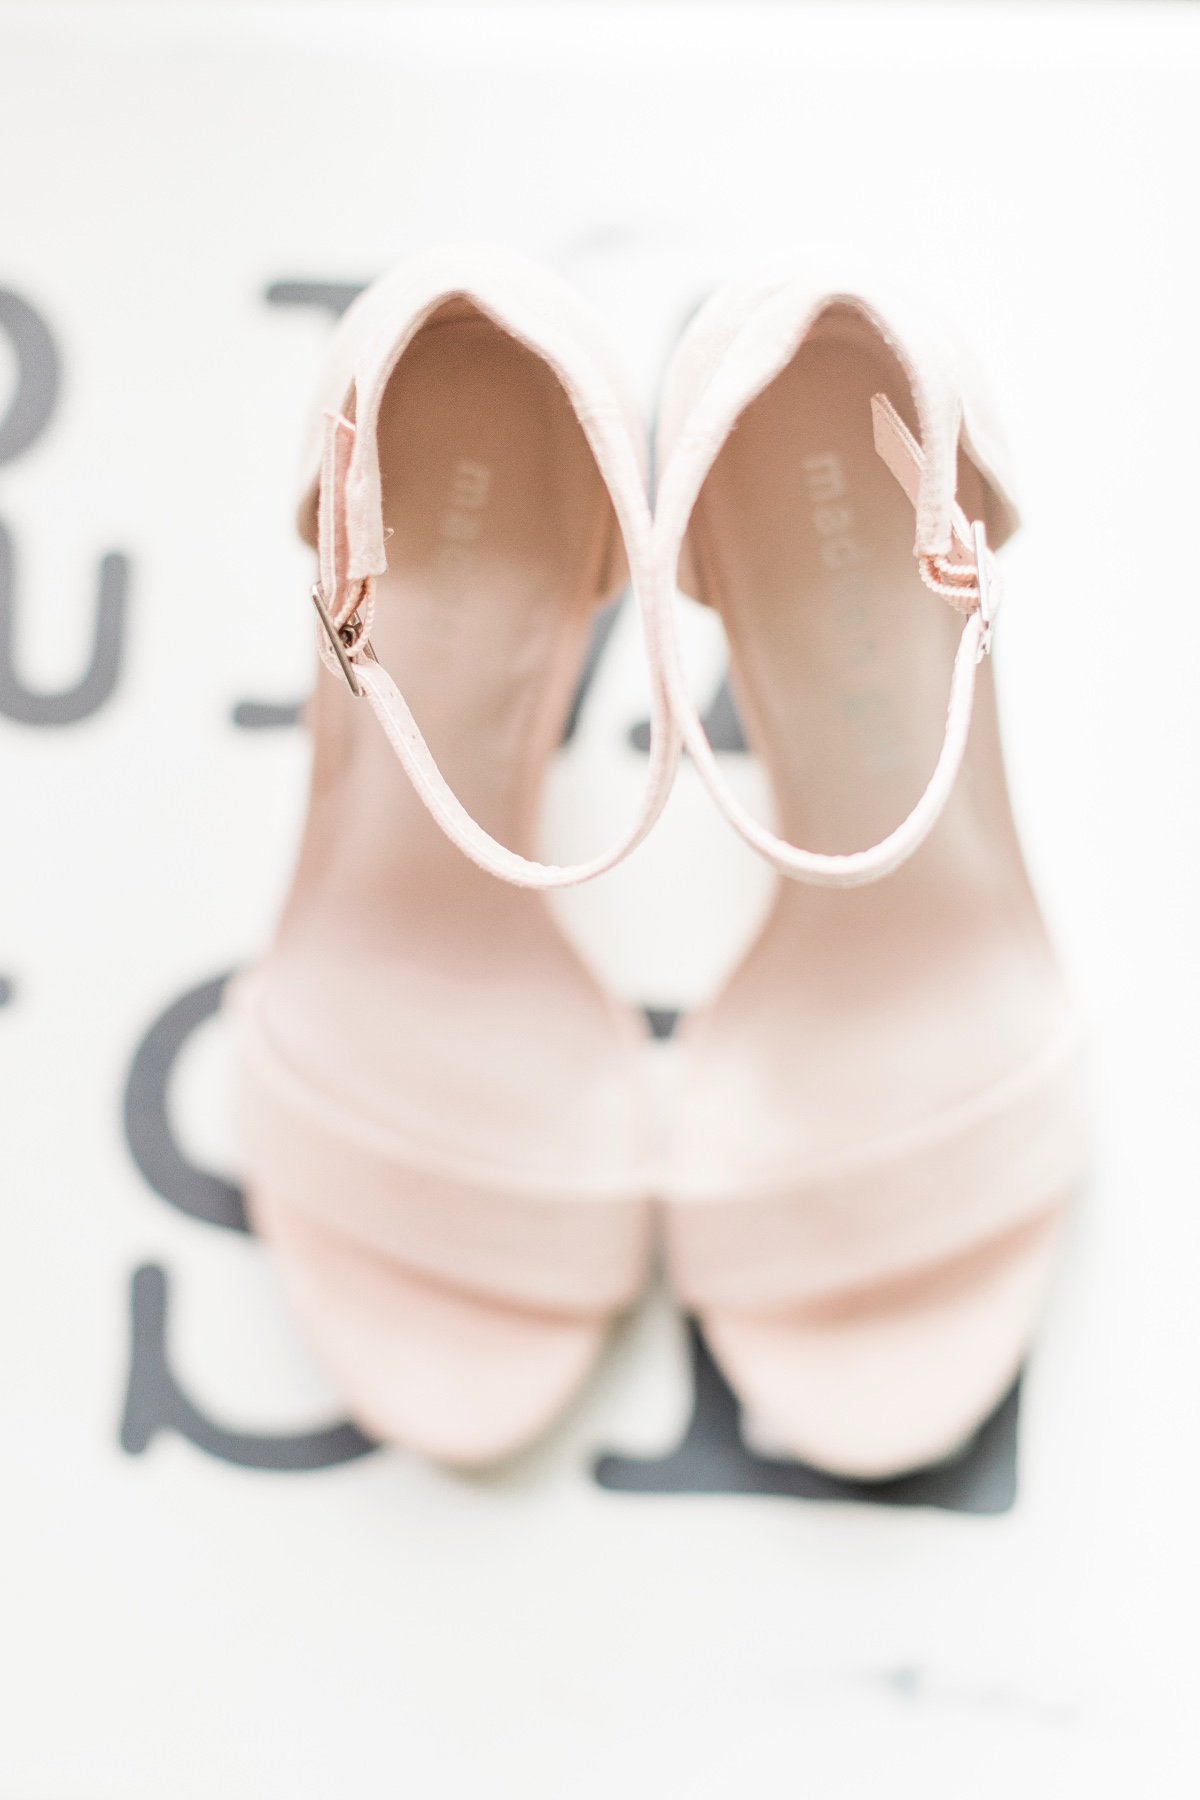 soft pink wedding shoes